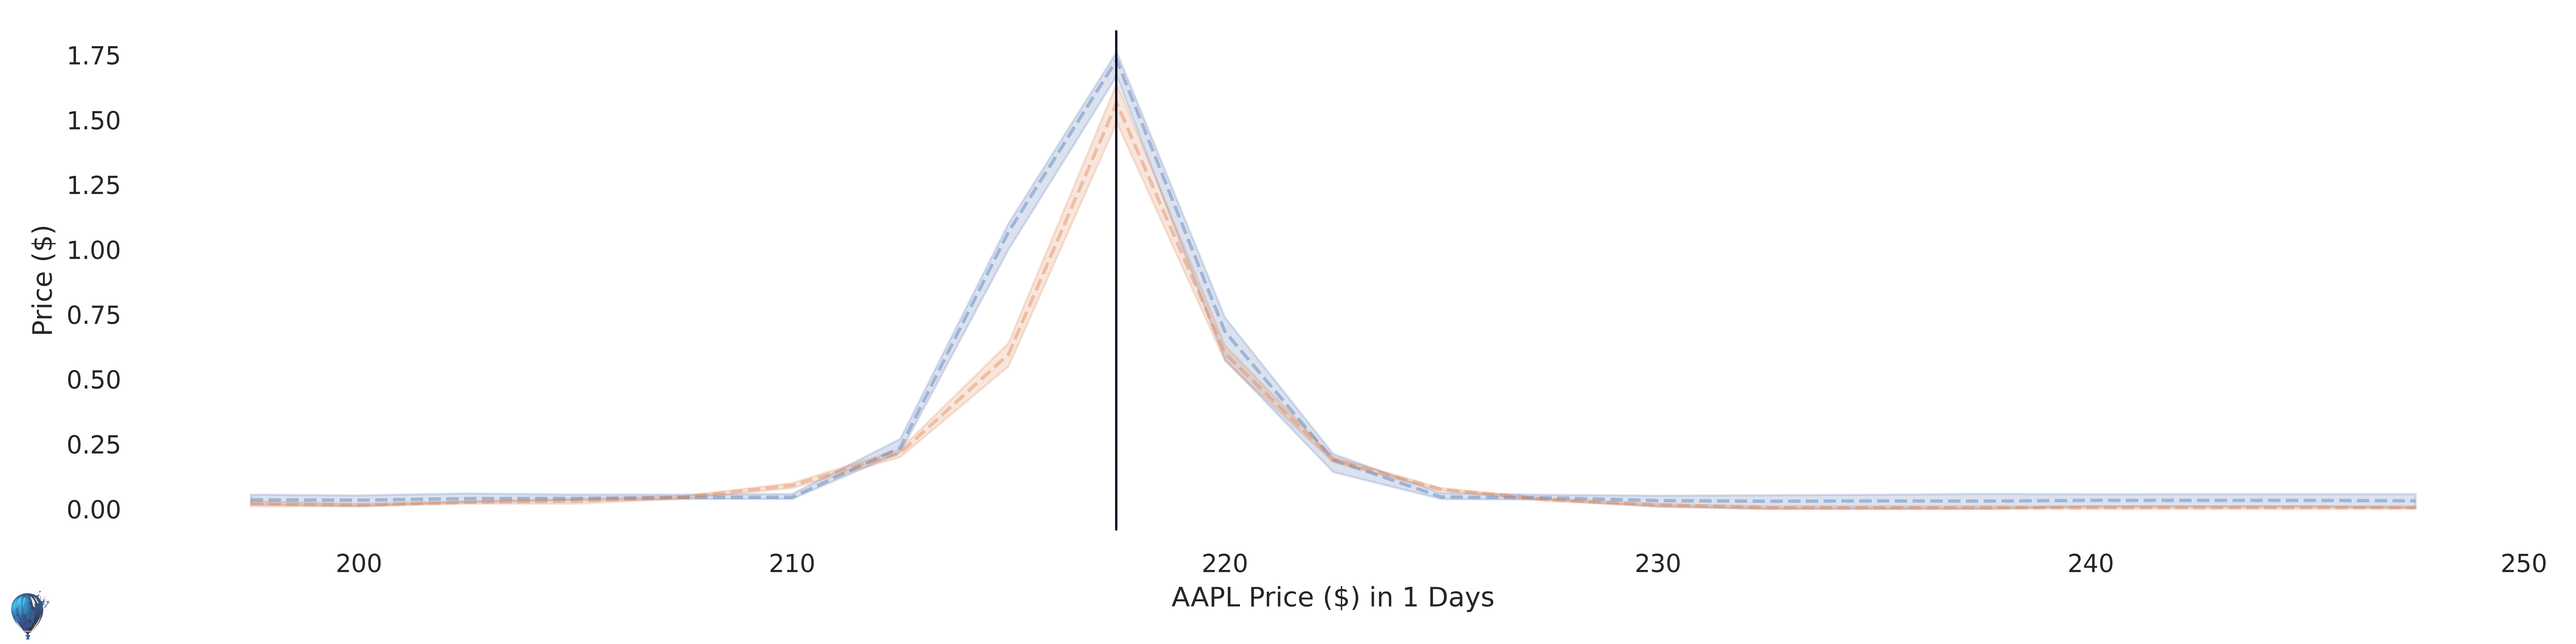 AAPL current options pricing